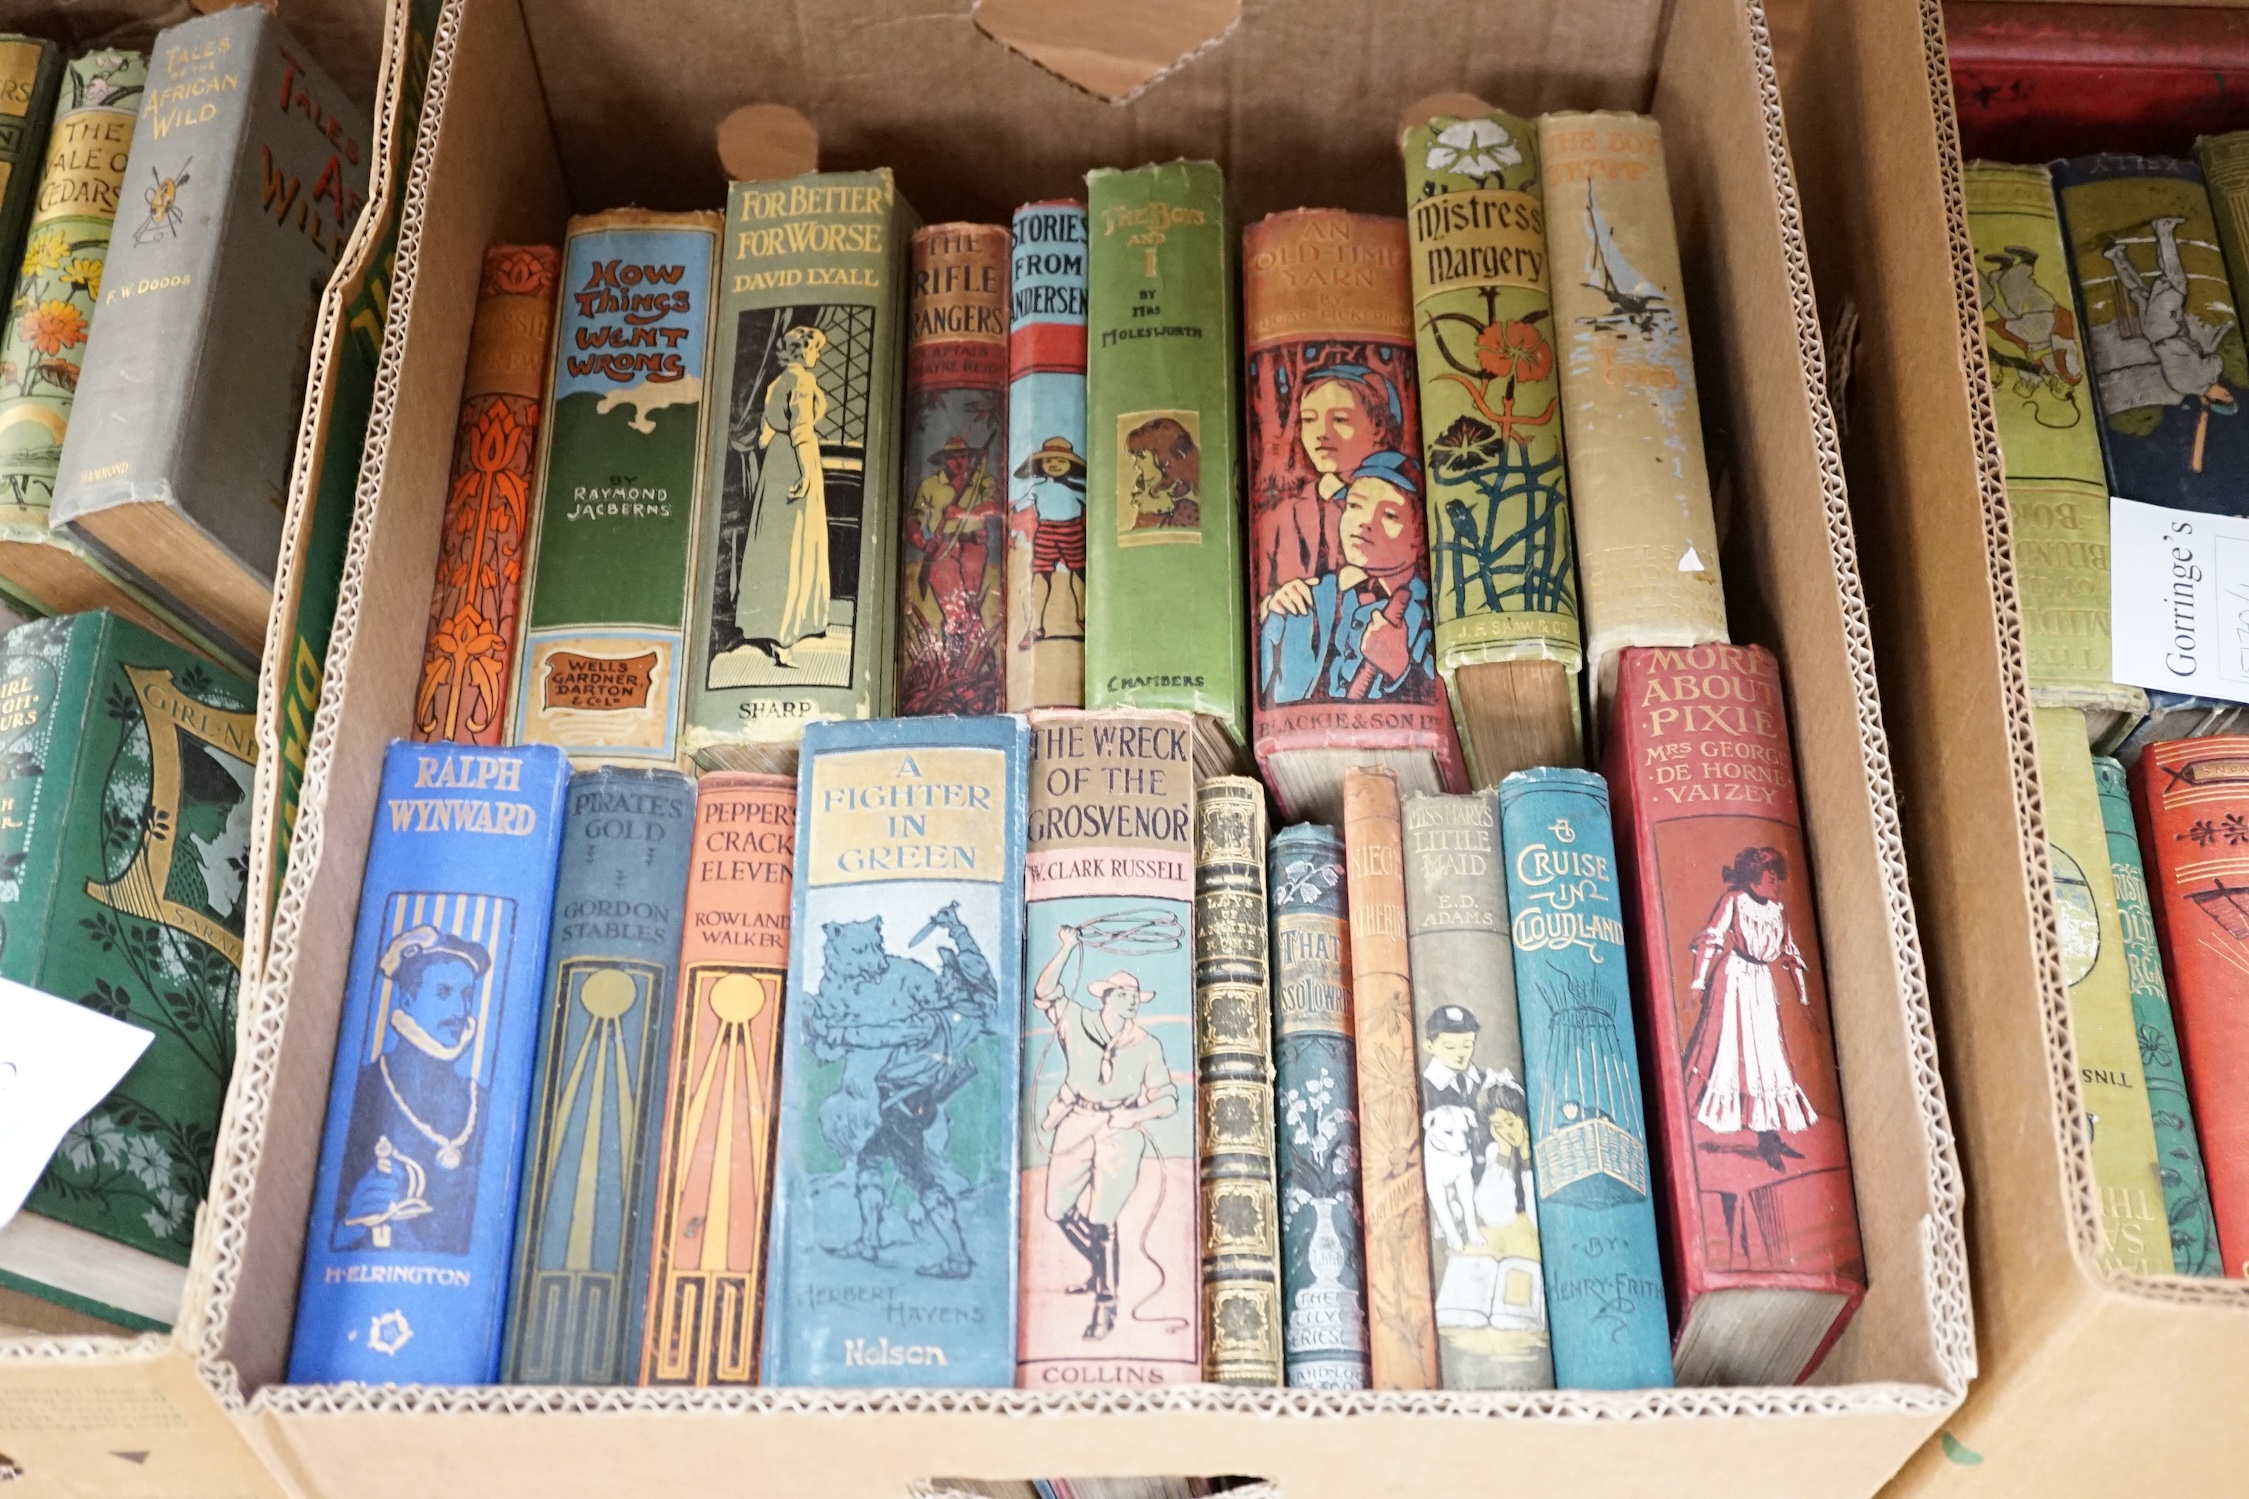 Old Children's books - mostly late 19th century and early 20th century; most with illus. and coloured pictorial cloth bindings; include F.W. Dodds - Tales of the African Wild (1914); Thos. Cobb - The Boy Tramp (1906); He